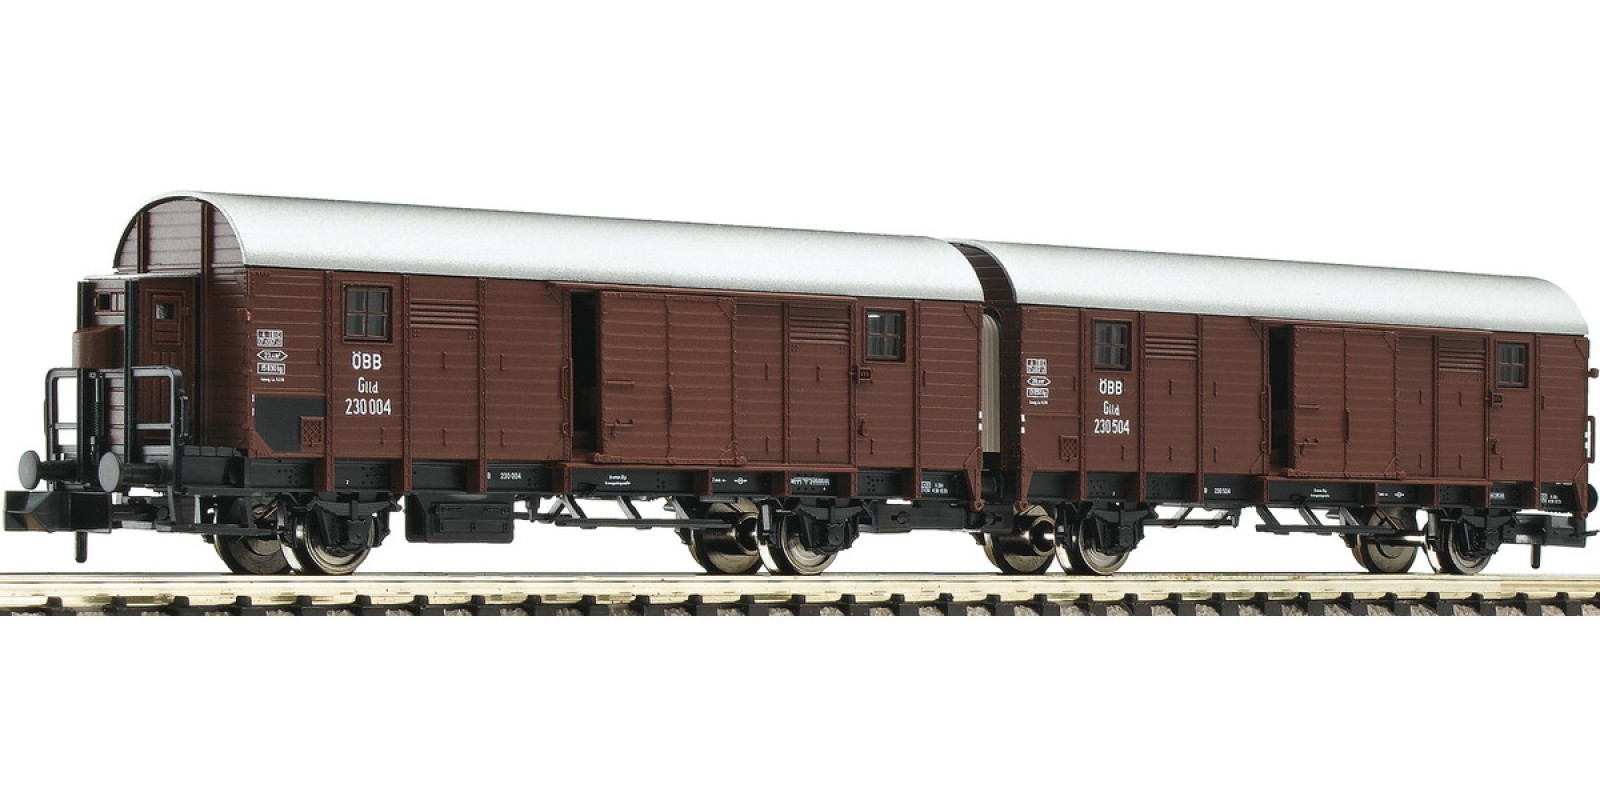 FL830604 Leig wagon unit, consists of two box cars type Glleh, ÖBB